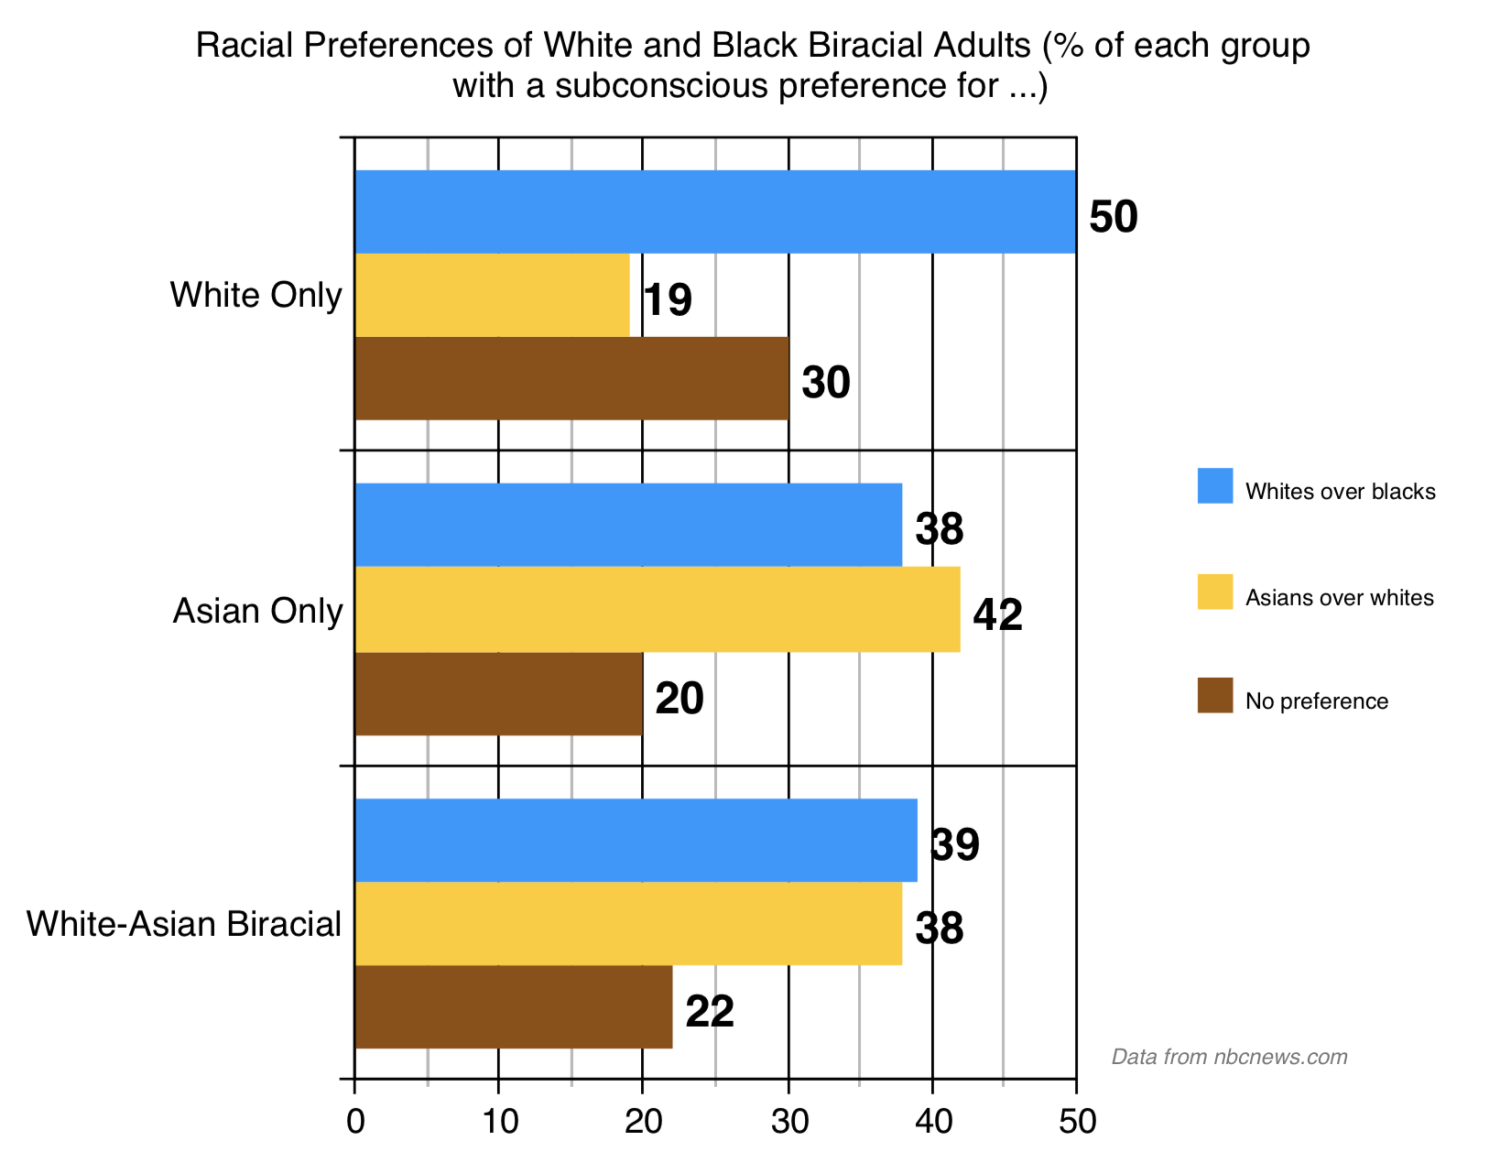 Racial preferences of white and black biracial adults